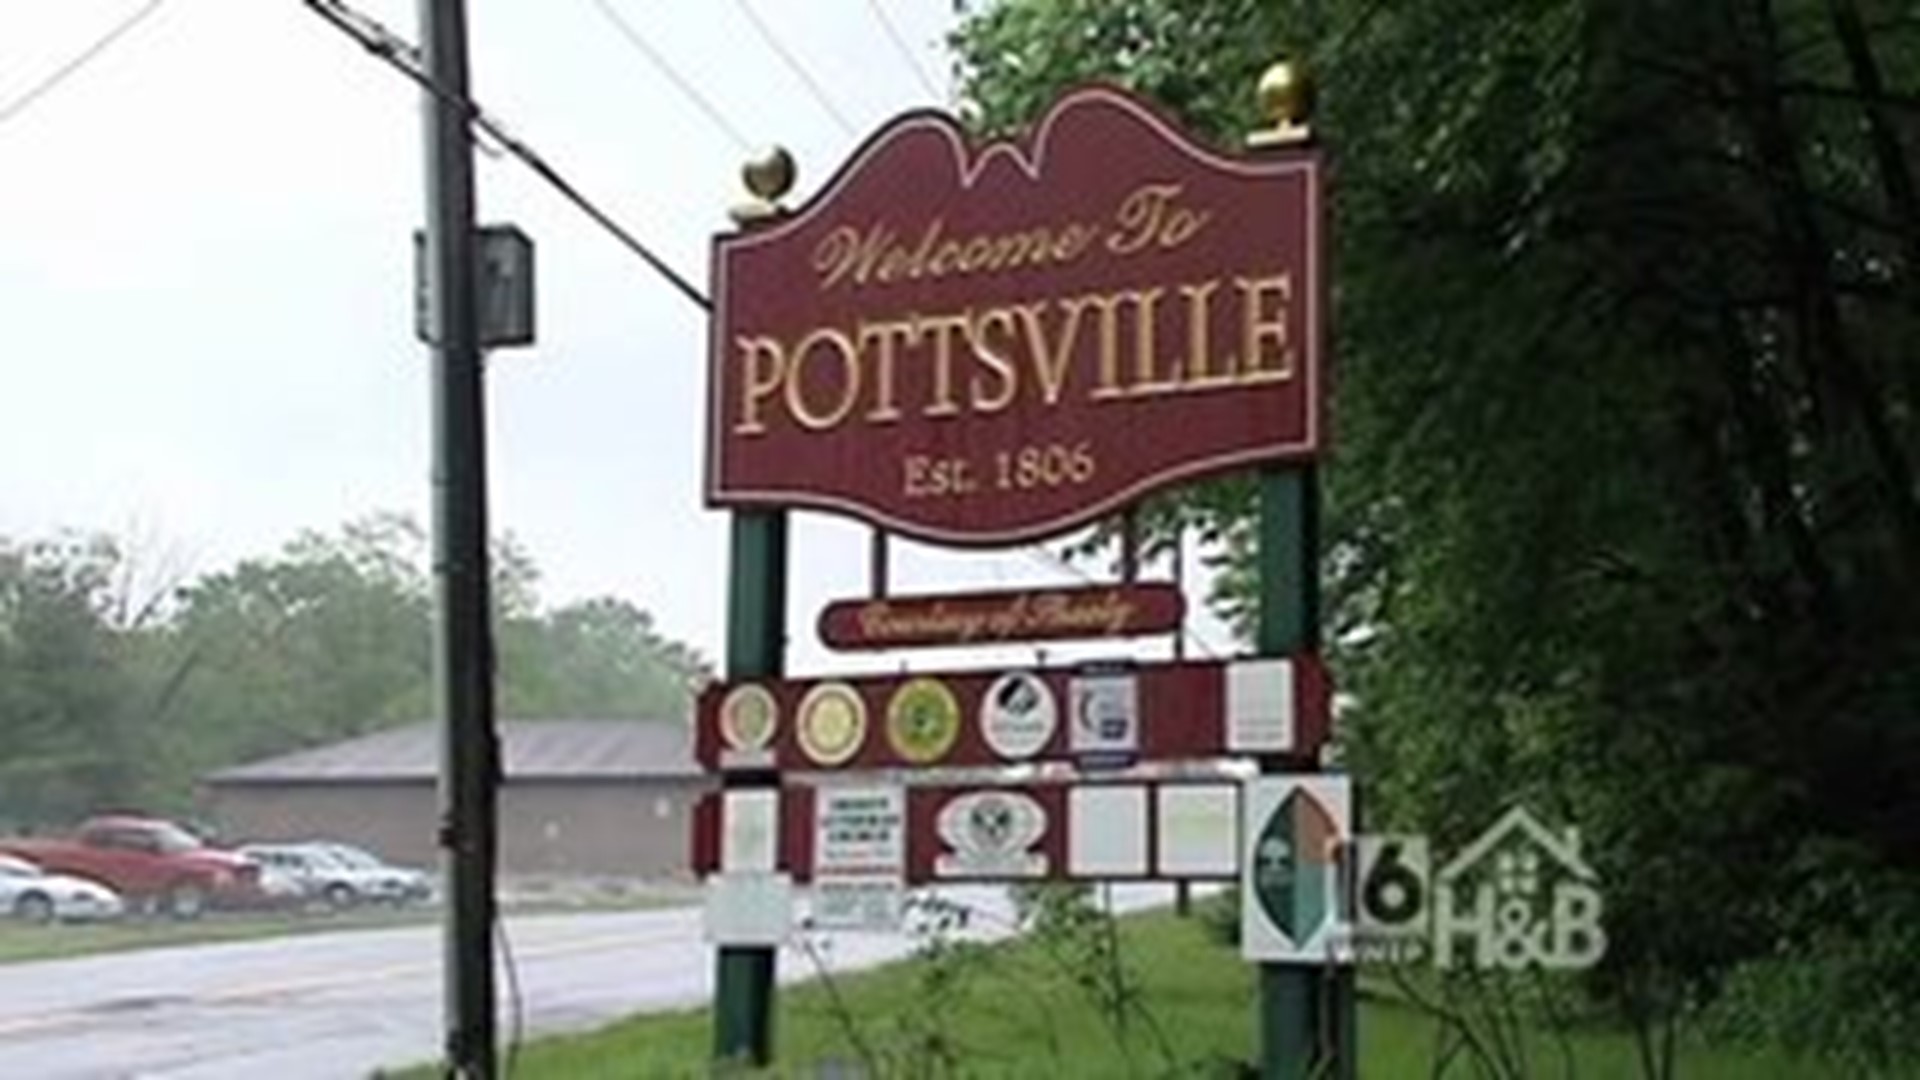 Pottsville: From Old to New